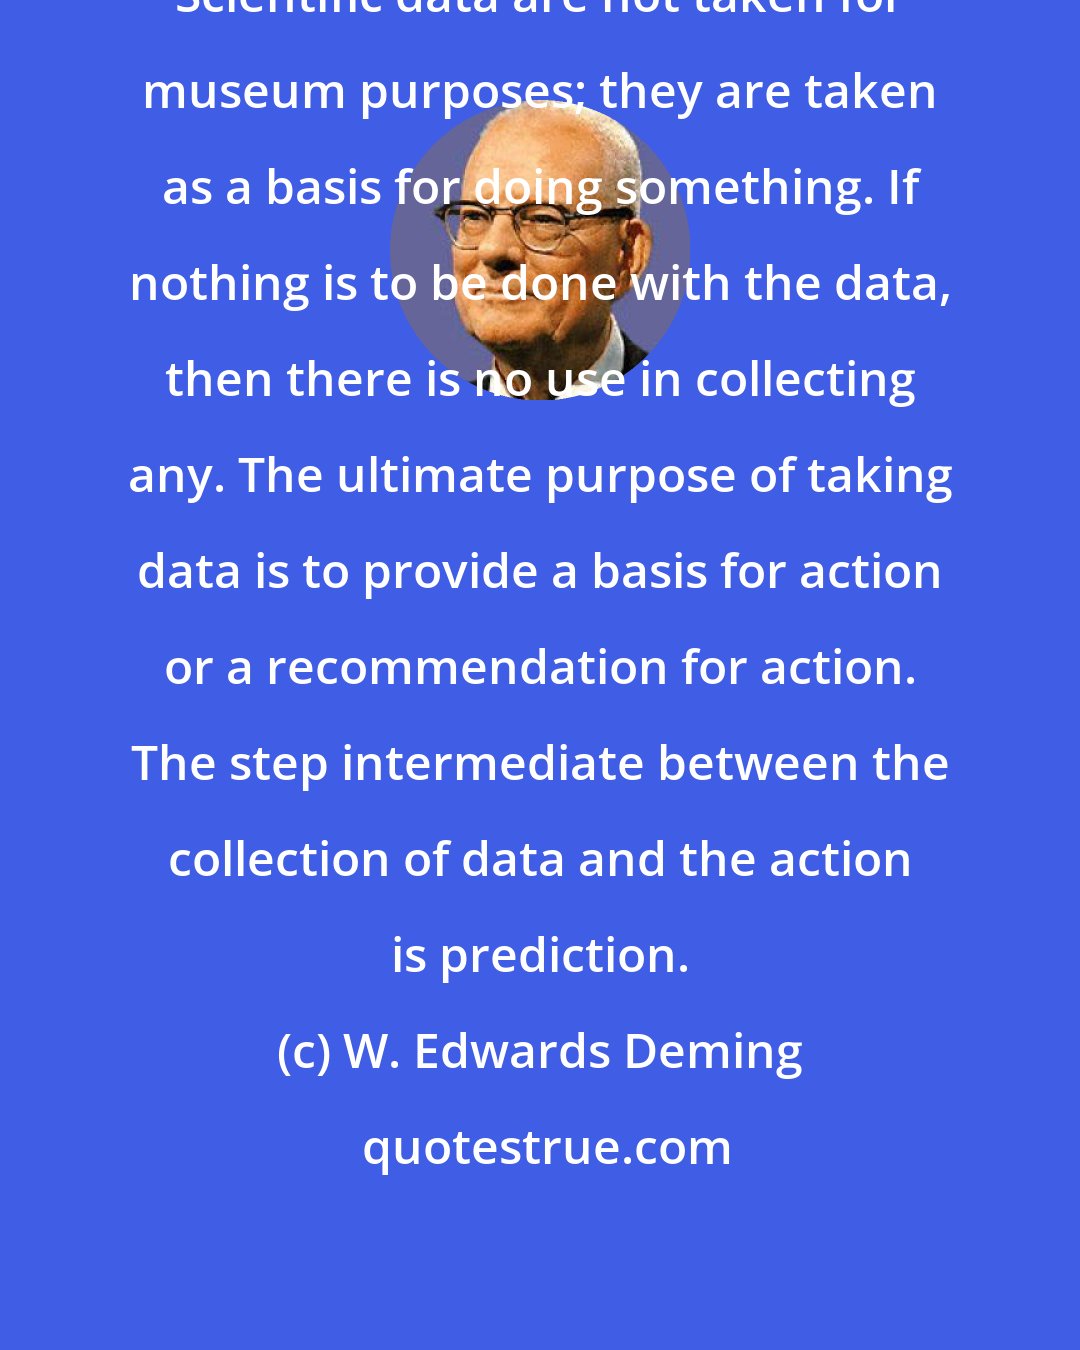 W. Edwards Deming: Scientific data are not taken for museum purposes; they are taken as a basis for doing something. If nothing is to be done with the data, then there is no use in collecting any. The ultimate purpose of taking data is to provide a basis for action or a recommendation for action. The step intermediate between the collection of data and the action is prediction.